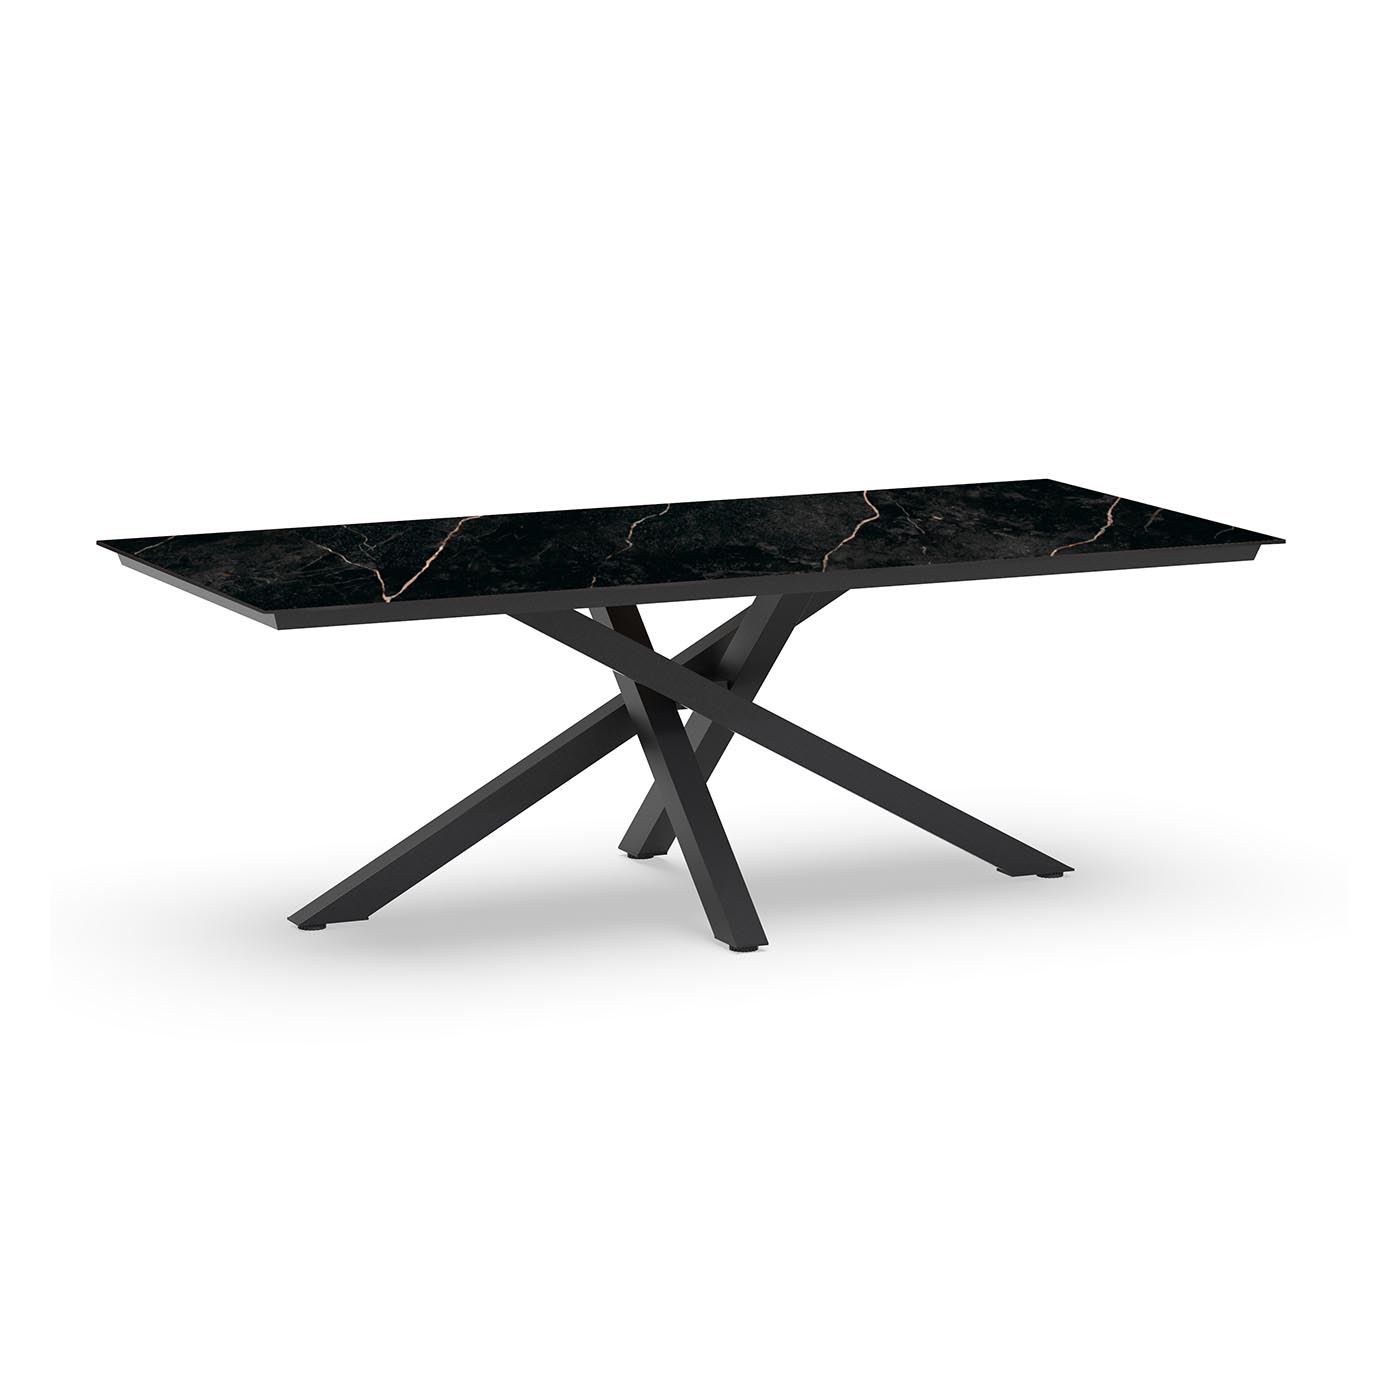 Orion Dining Table Trespa Marble 220 x 100 cm Charcoal